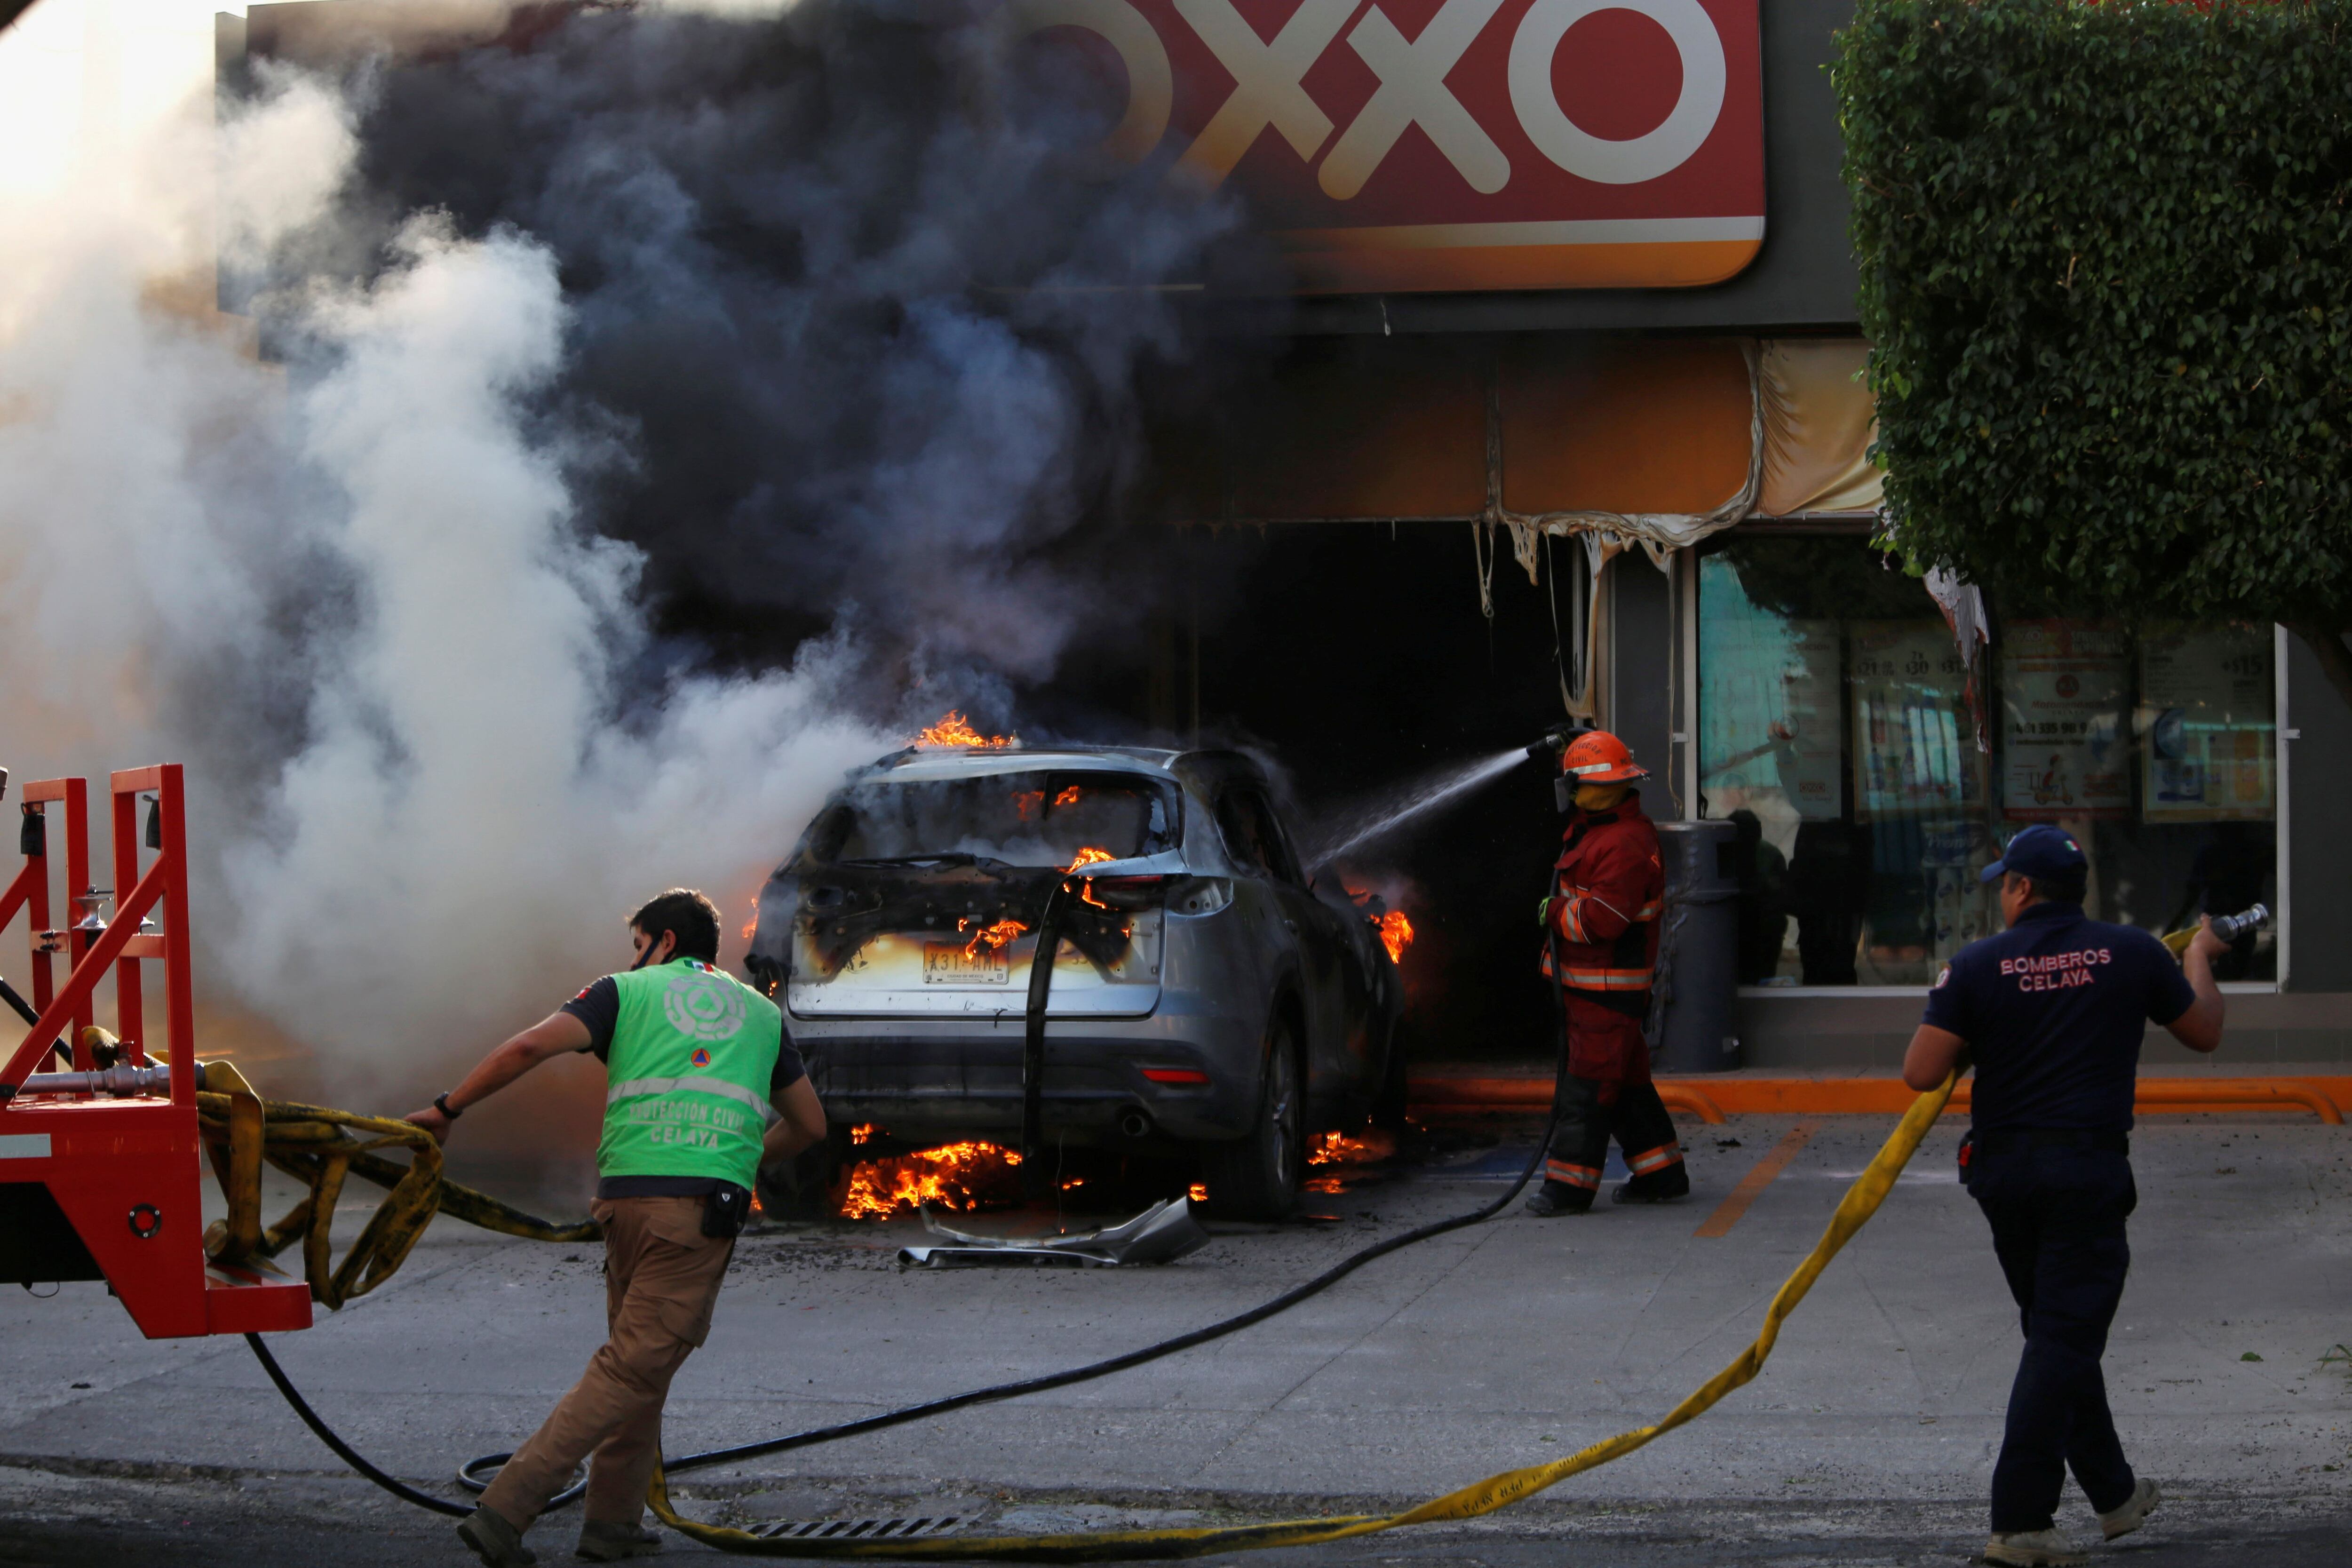 Firefighters work on a burning car outside a store after an operation by security forces against organized crime in Celaya, in Guanajuato state, Mexico June 20, 2020. REUTERS/Sergio Maldonado